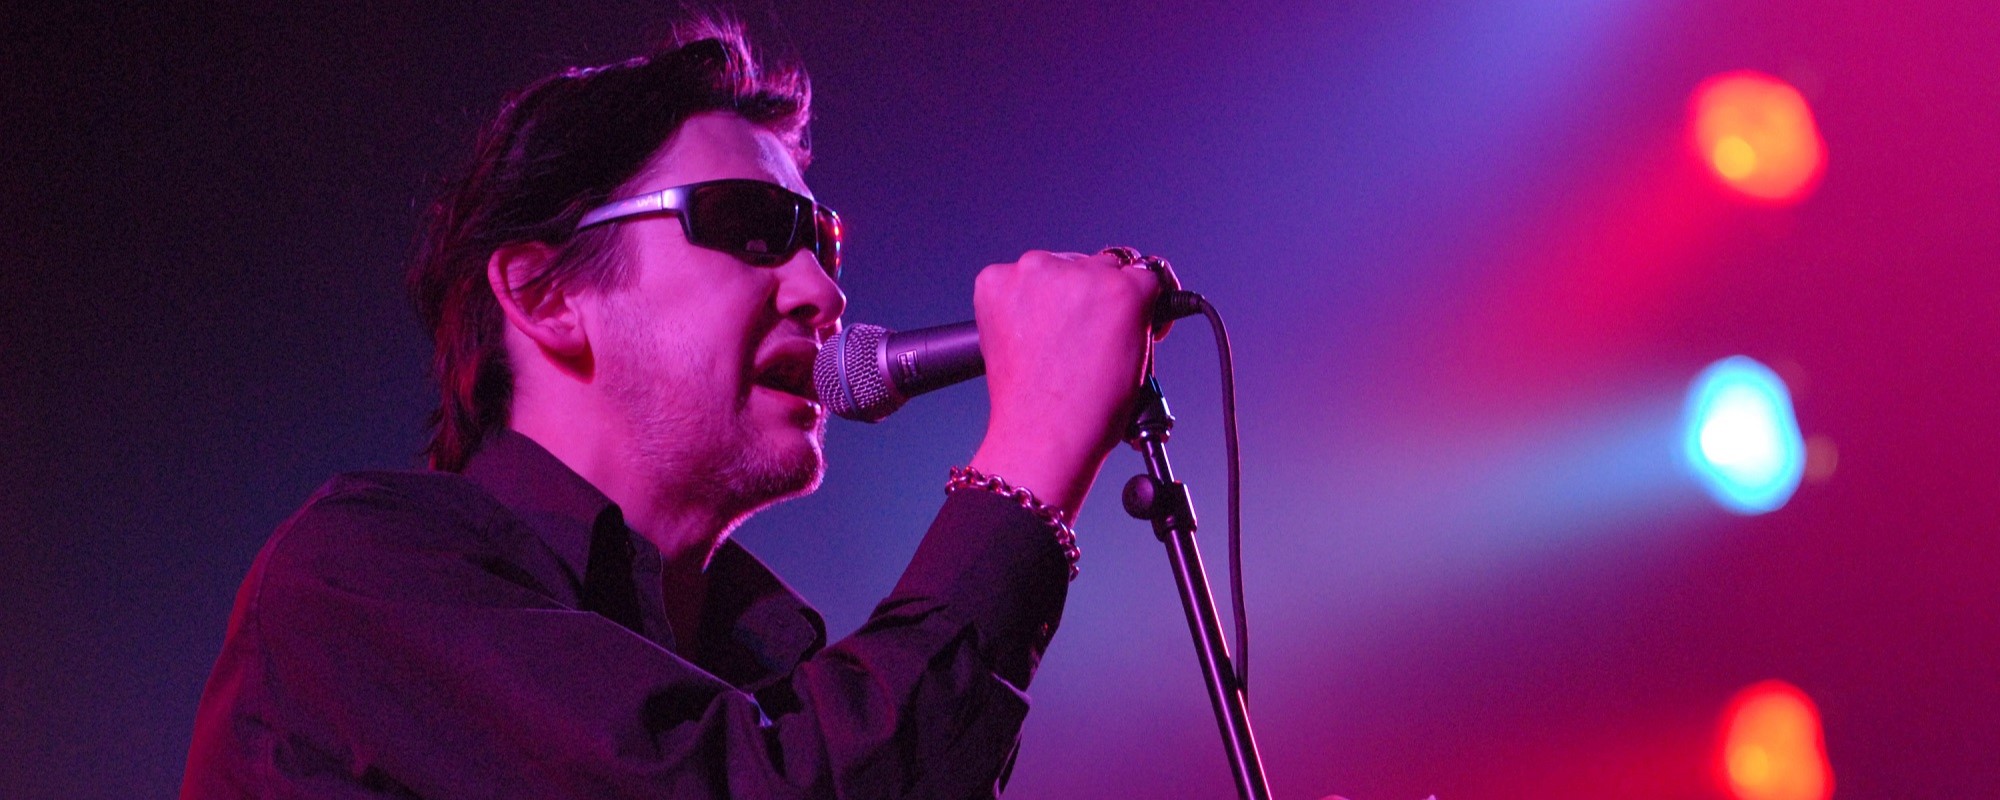 Shane MacGowan’s Friend and Undertaker Promises a “Memorable” Tribute for the Late Pogues Singer